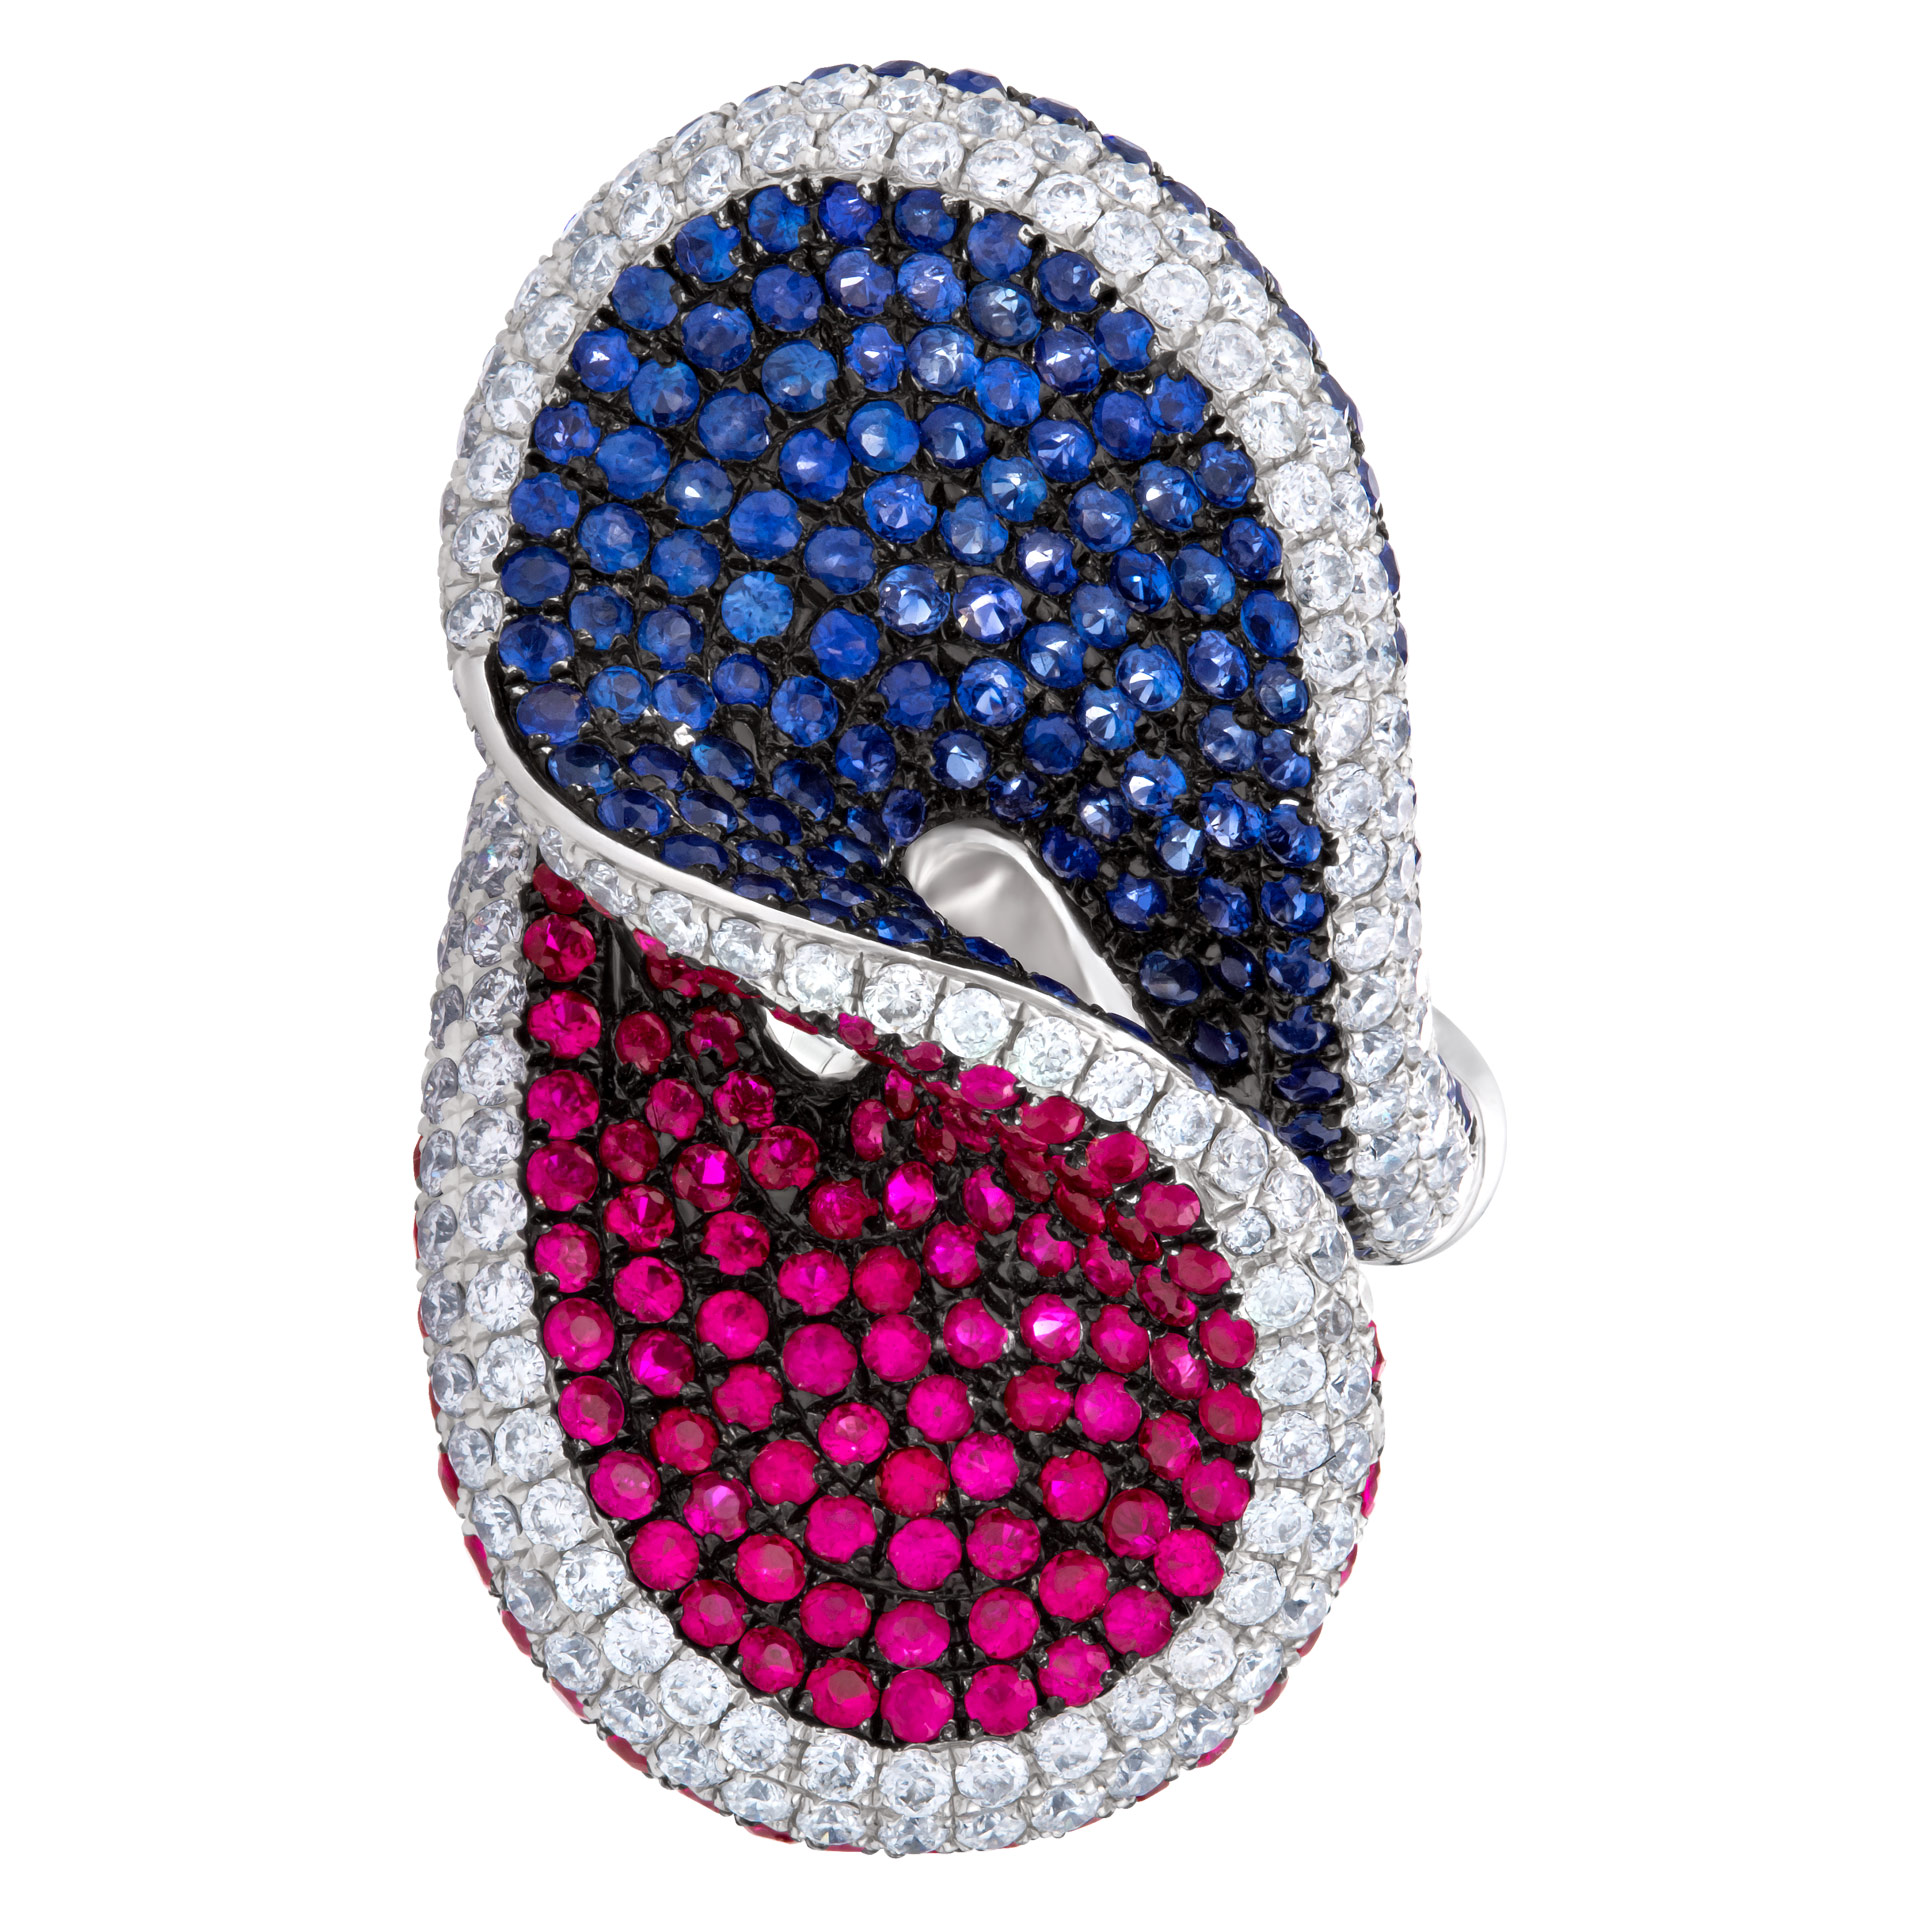 Beautiful twisted diamond, sapphire and ruby ring set in 18k white gold